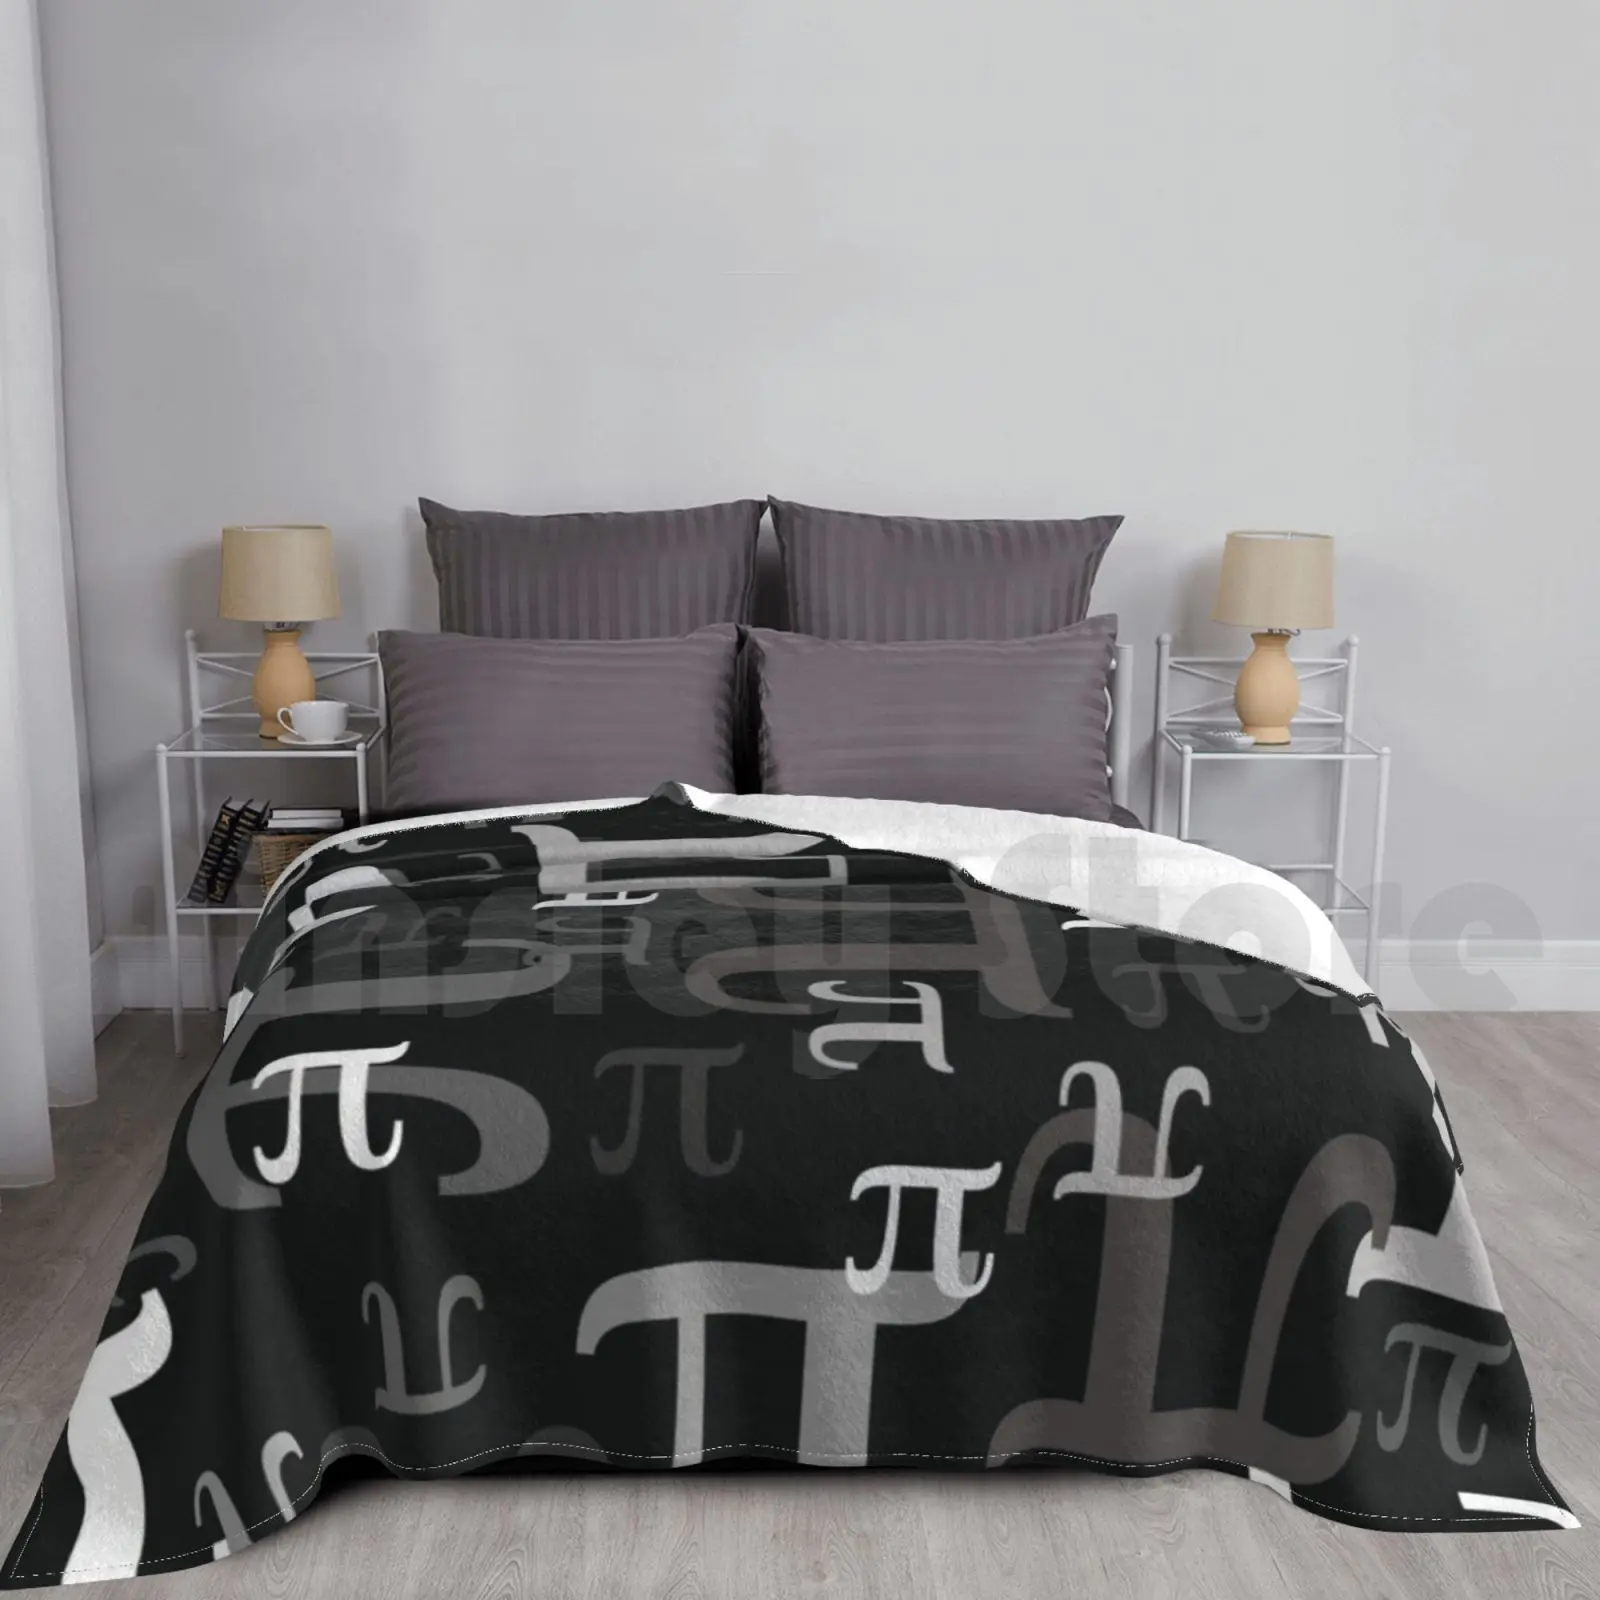 

Pieces Of Pi ( Dark ) Blanket For Sofa Bed Travel Pi Math Pi Day Nerd Geek Nerdy Geeky Science Pretty Cool